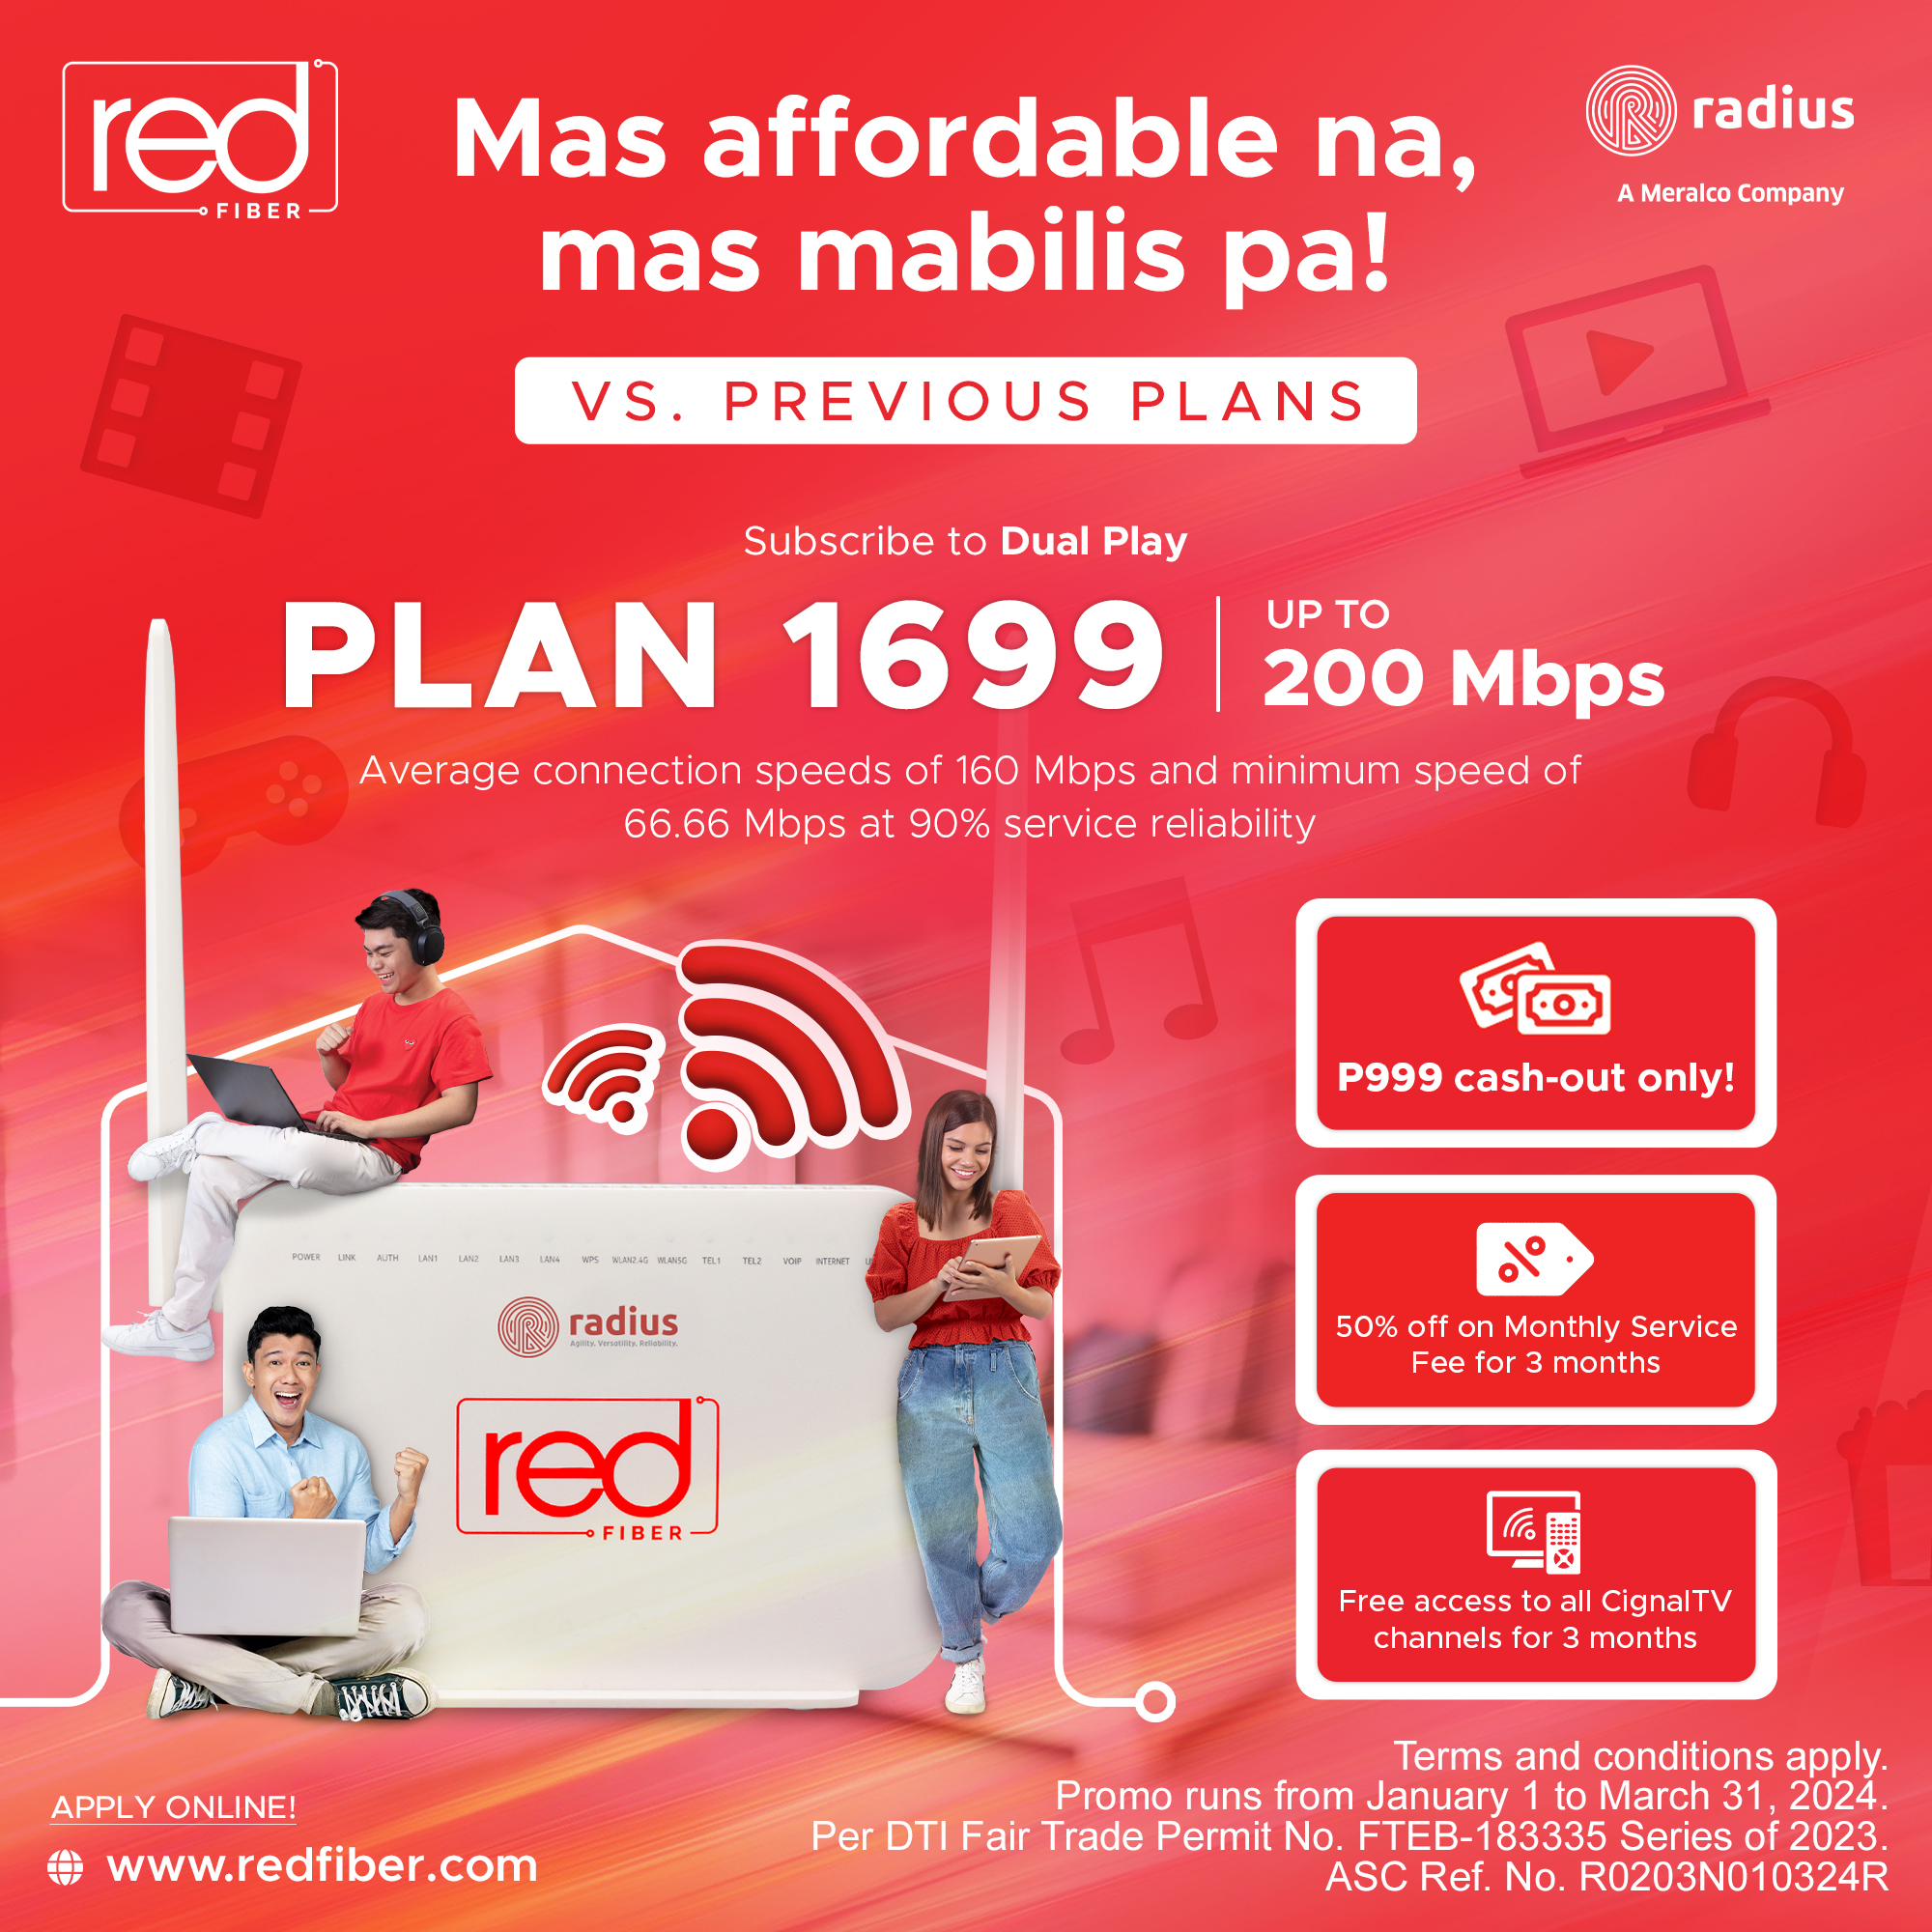 RED Fiber launches faster, cheaper plans you can't resist